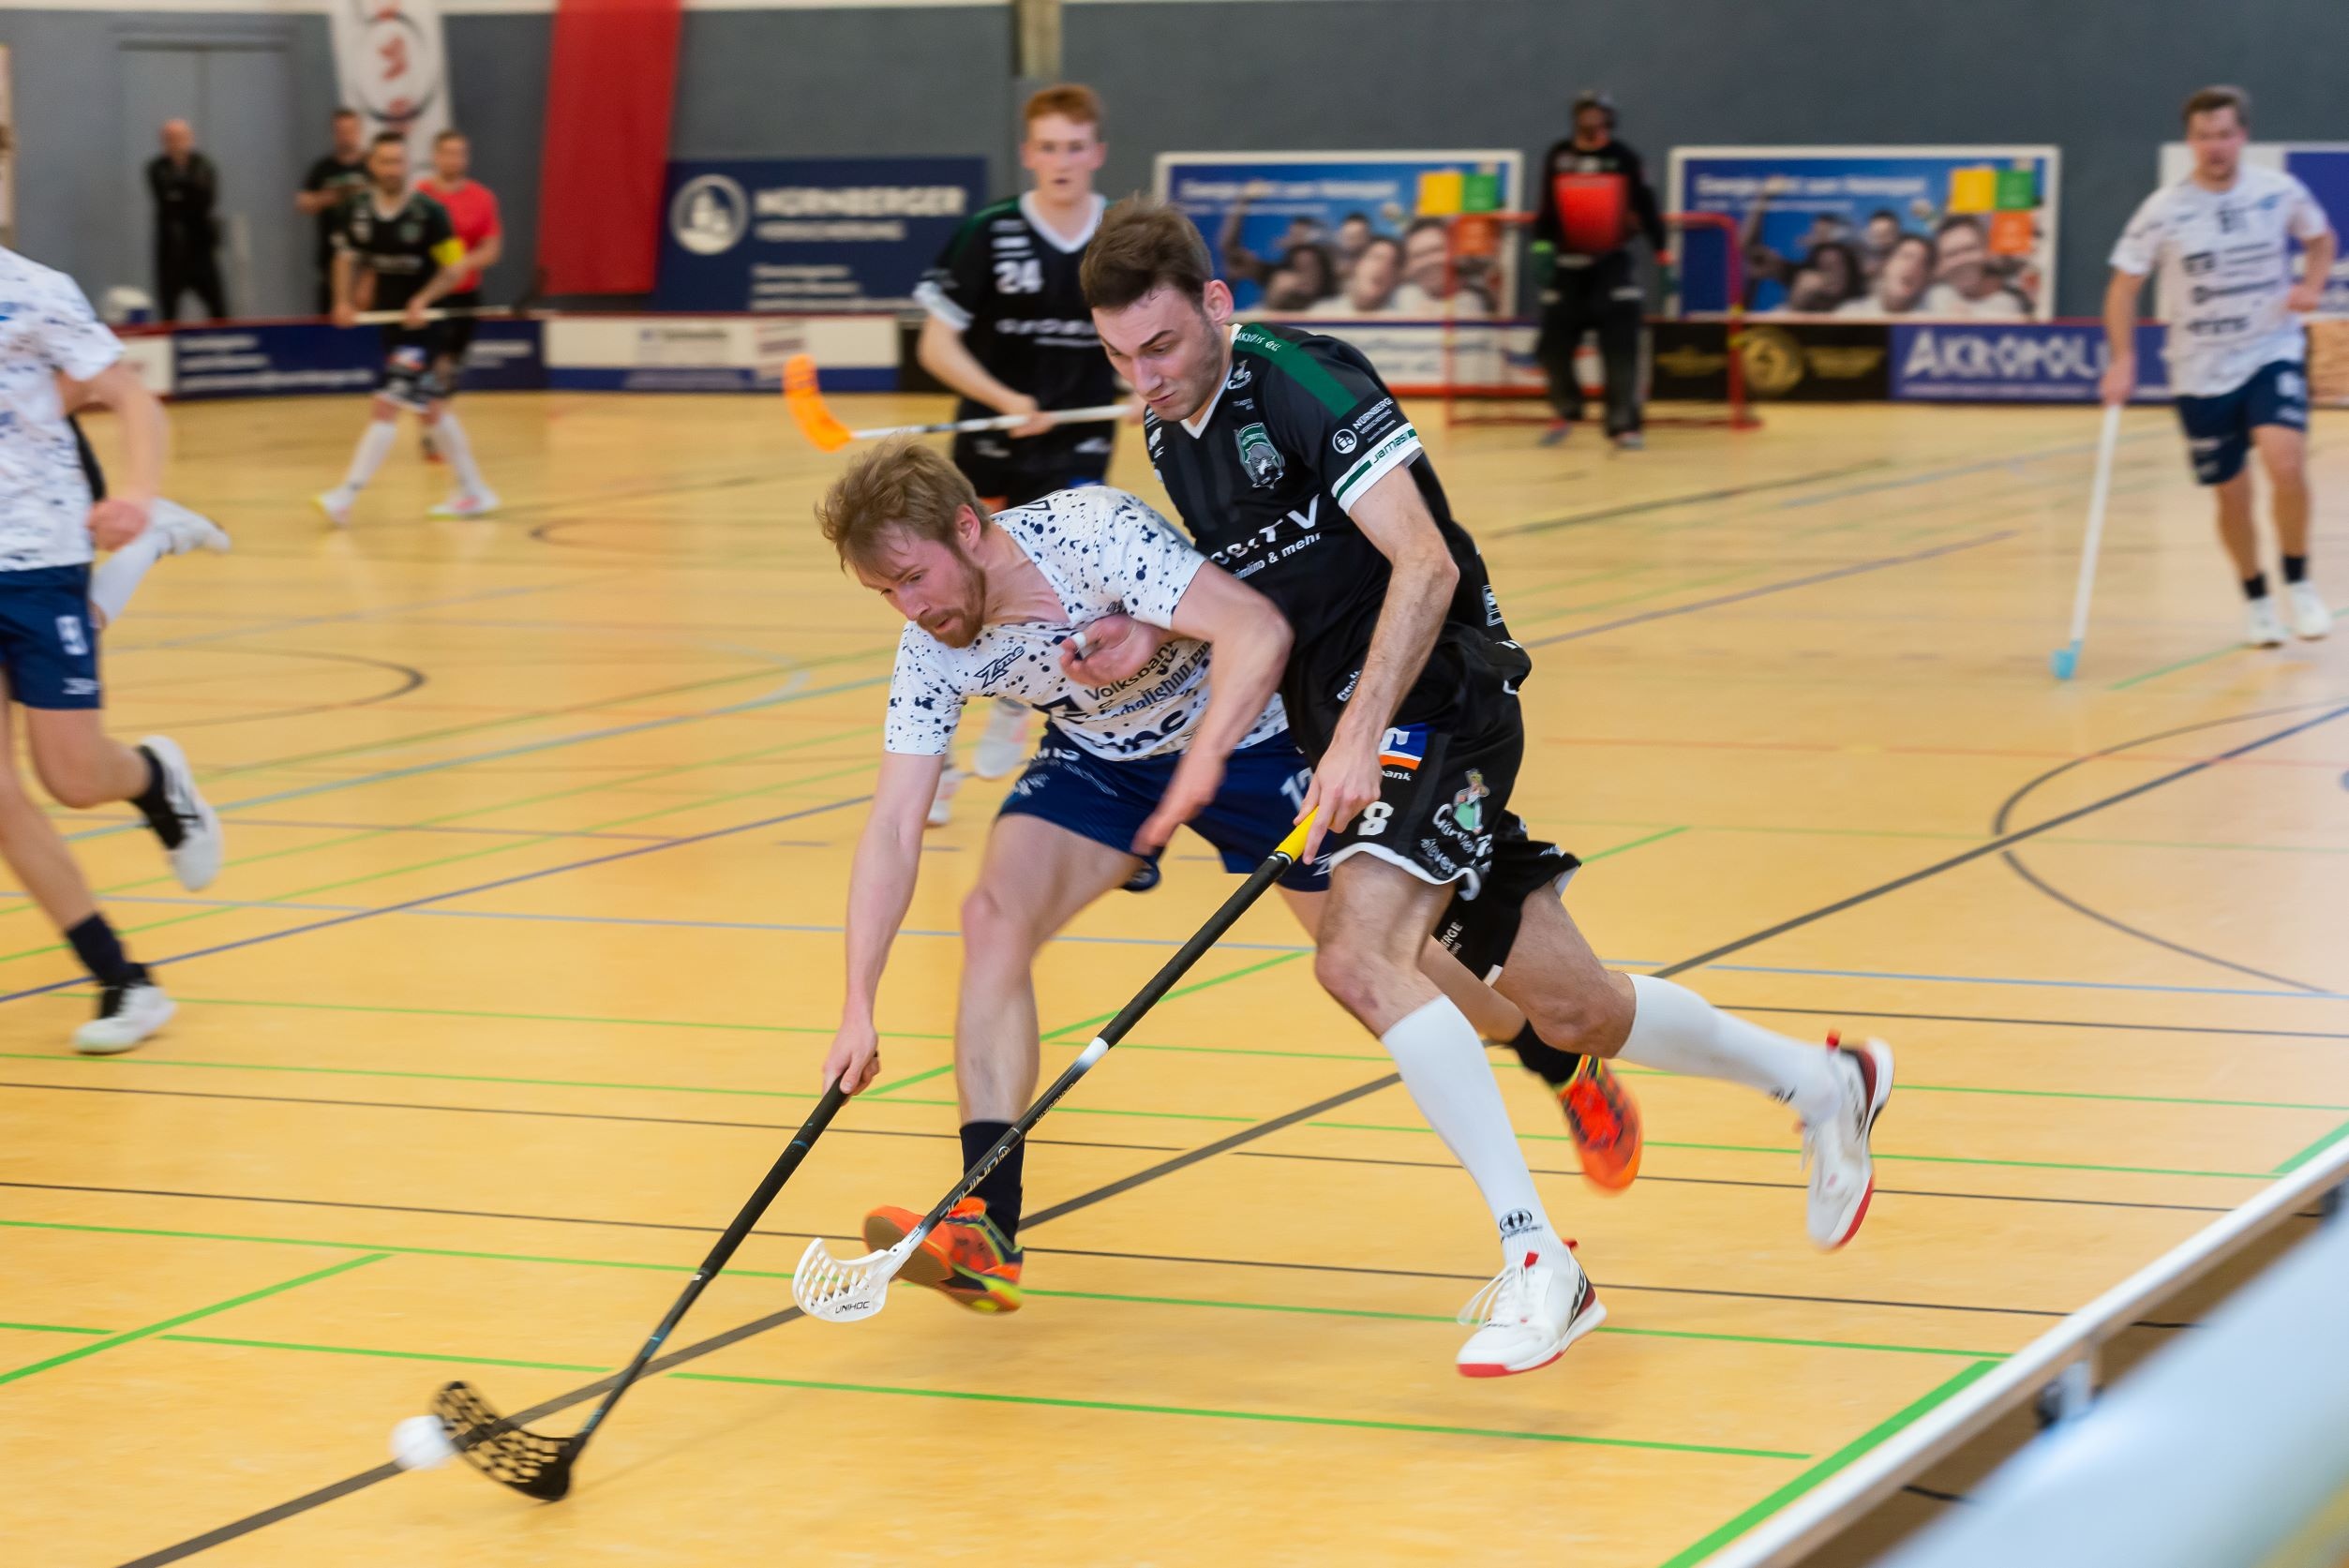 Floorball: The German League competition, Men's event, Recreational activity and indoor sport. 2510x1680 HD Wallpaper.